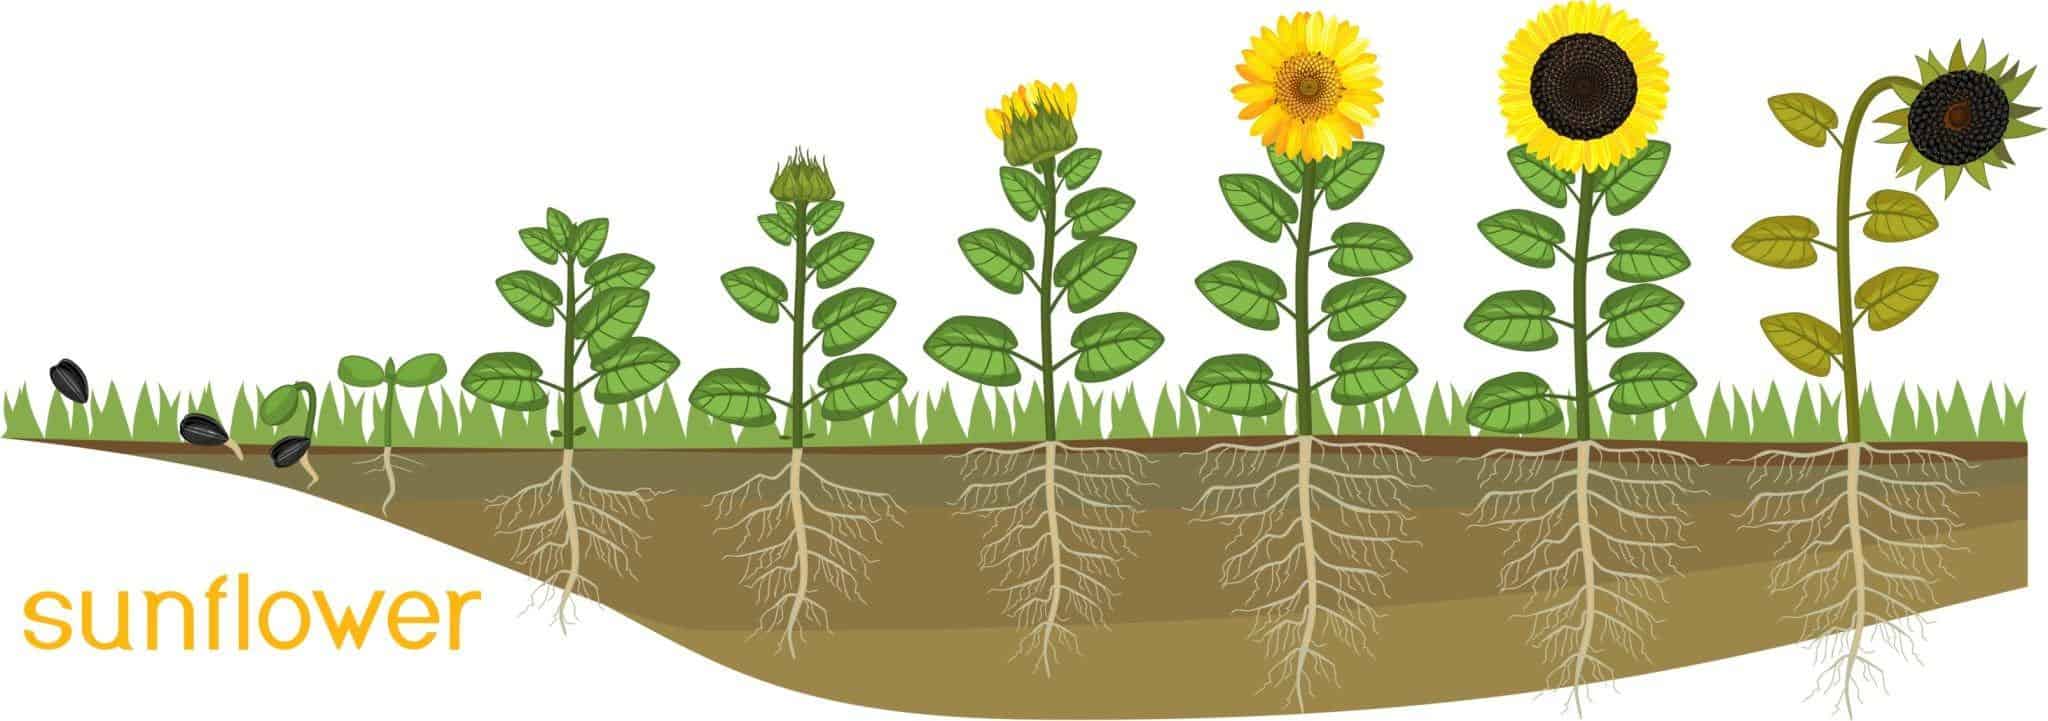 sunflowers stage life cycle